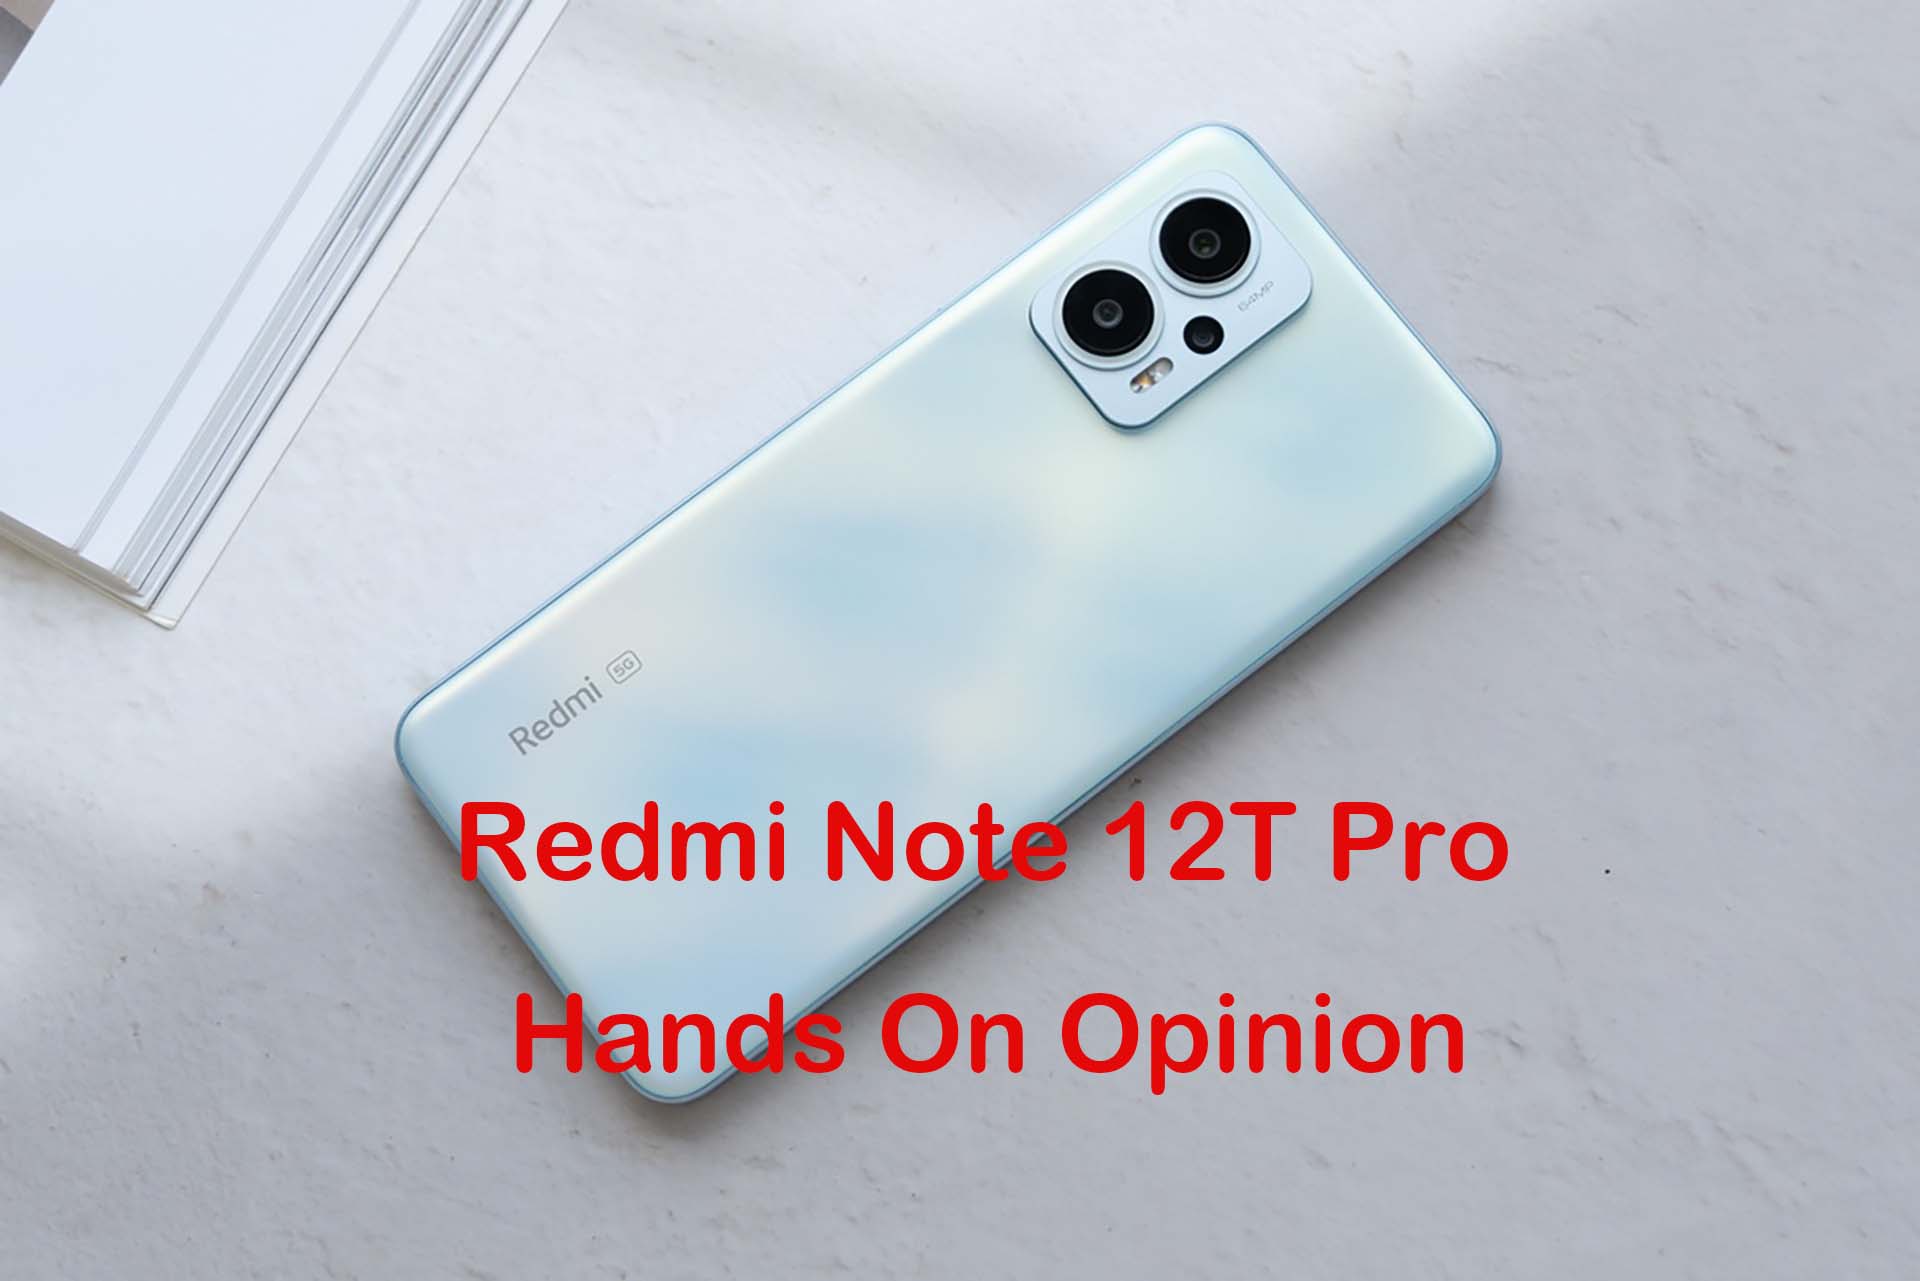 Redmi Note 12T Pro Hands On Opinion & Impressions